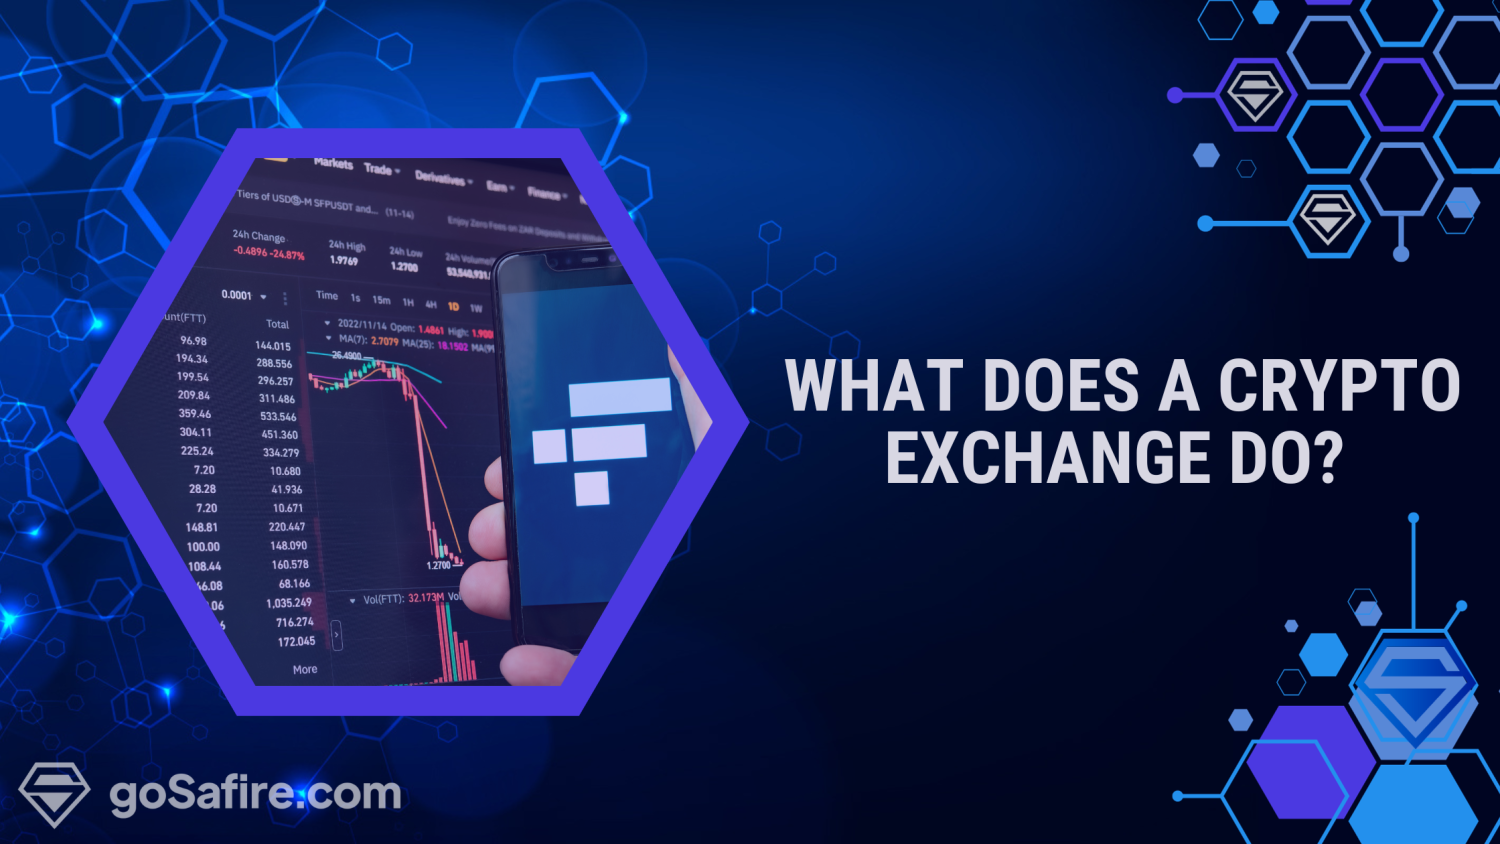 What Does a Crypto Exchange Do?